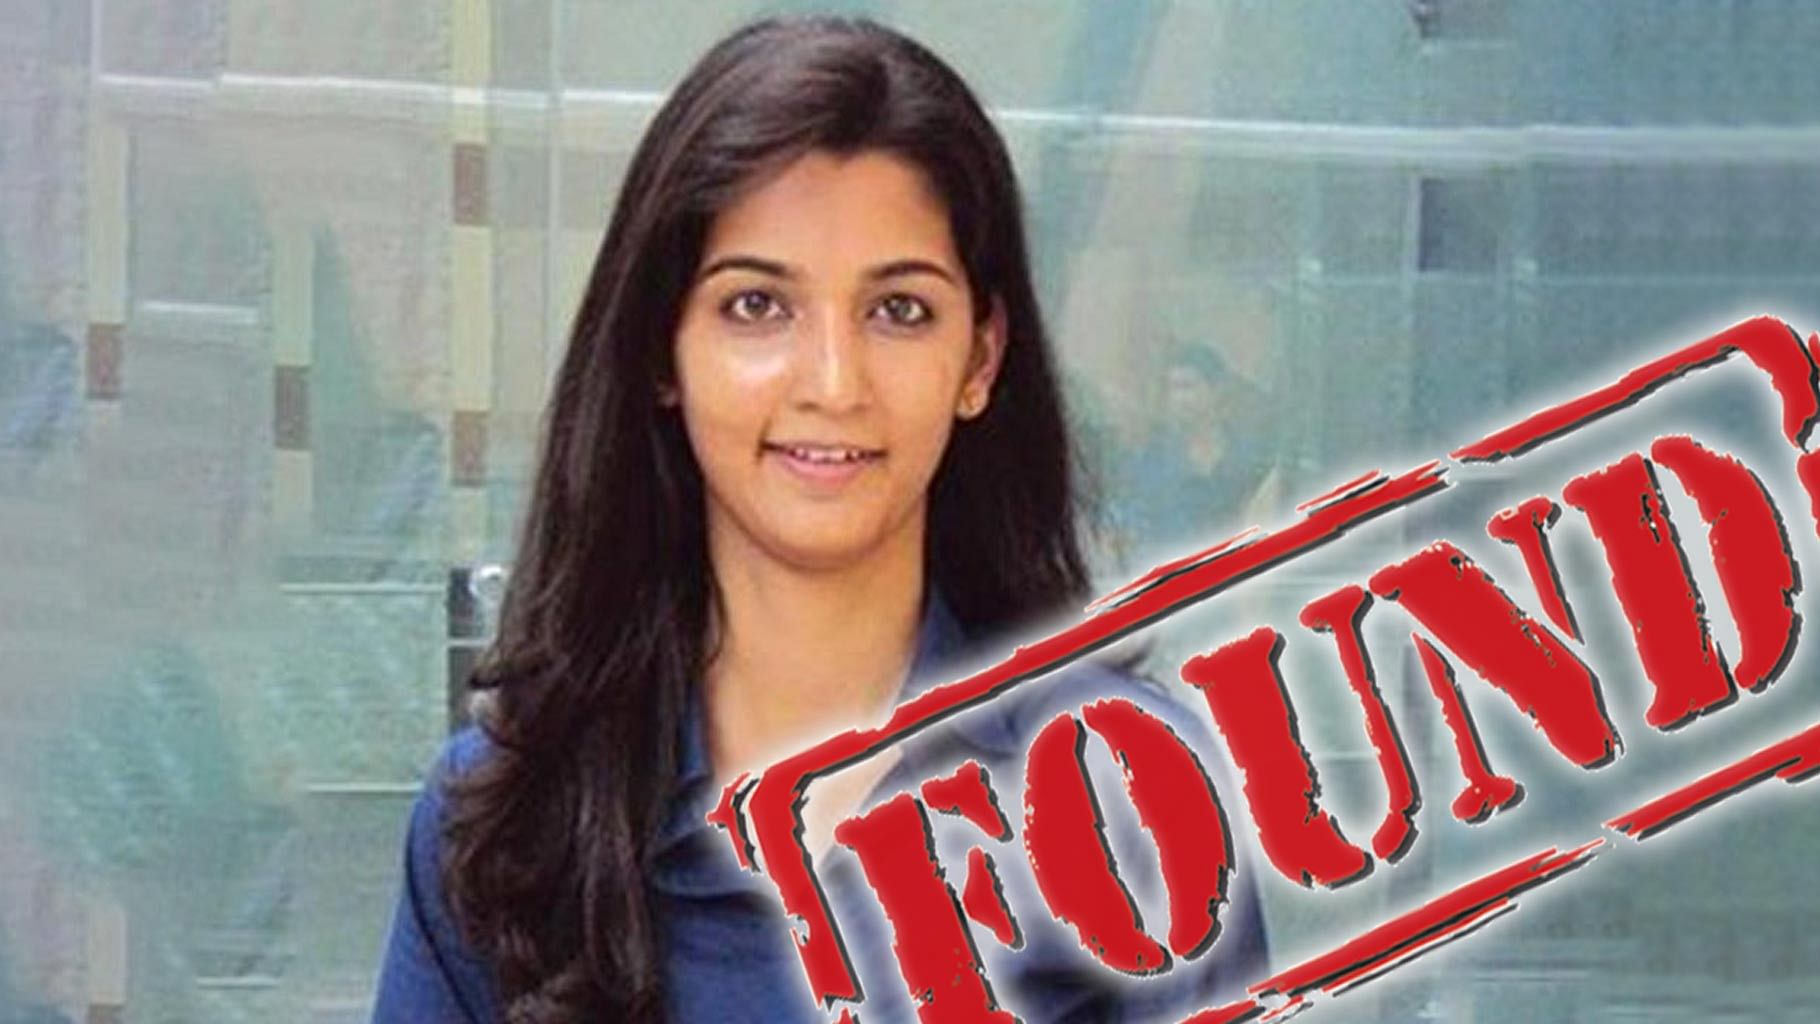 Dipti Sarna, who went missing on Wednesday night, was an employee of Snapdeal. (Photo Courtesy: Snapdeal)